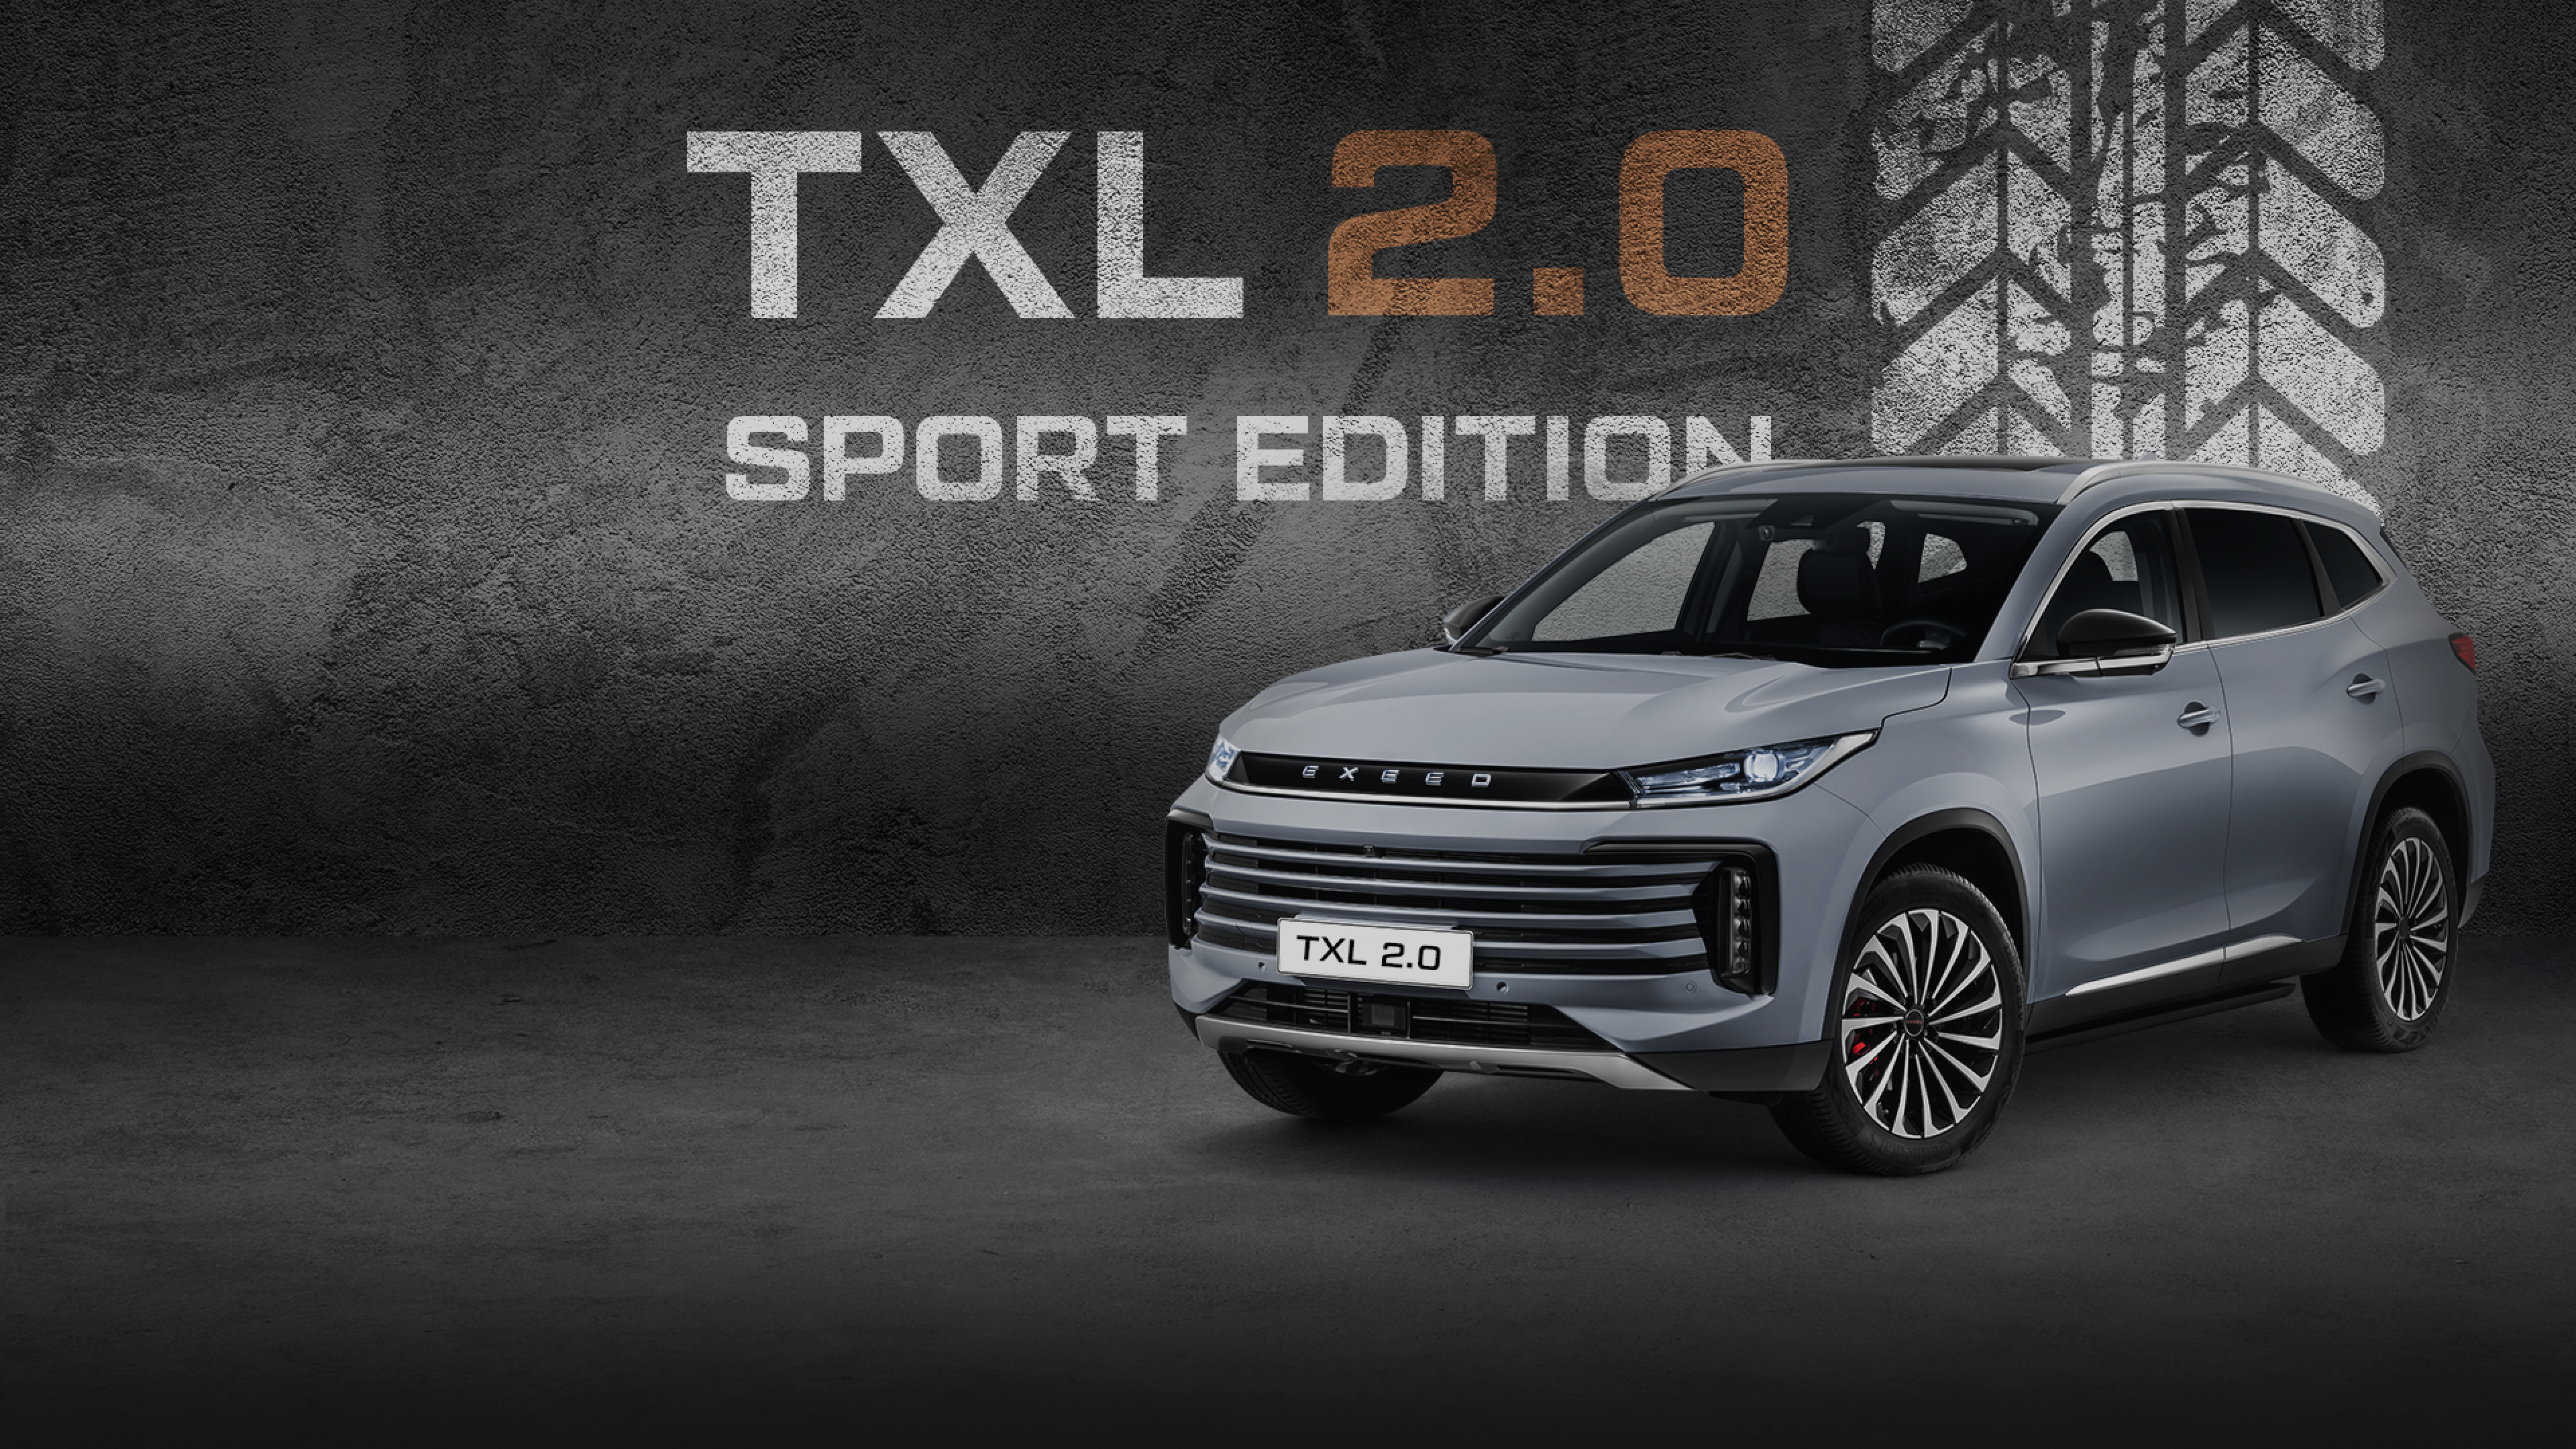 Exceed sport edition. Exeed TXL 2. Эксид кроссовер. Exceed TXL 2.0. Exeed TXL 2.0 Sport.